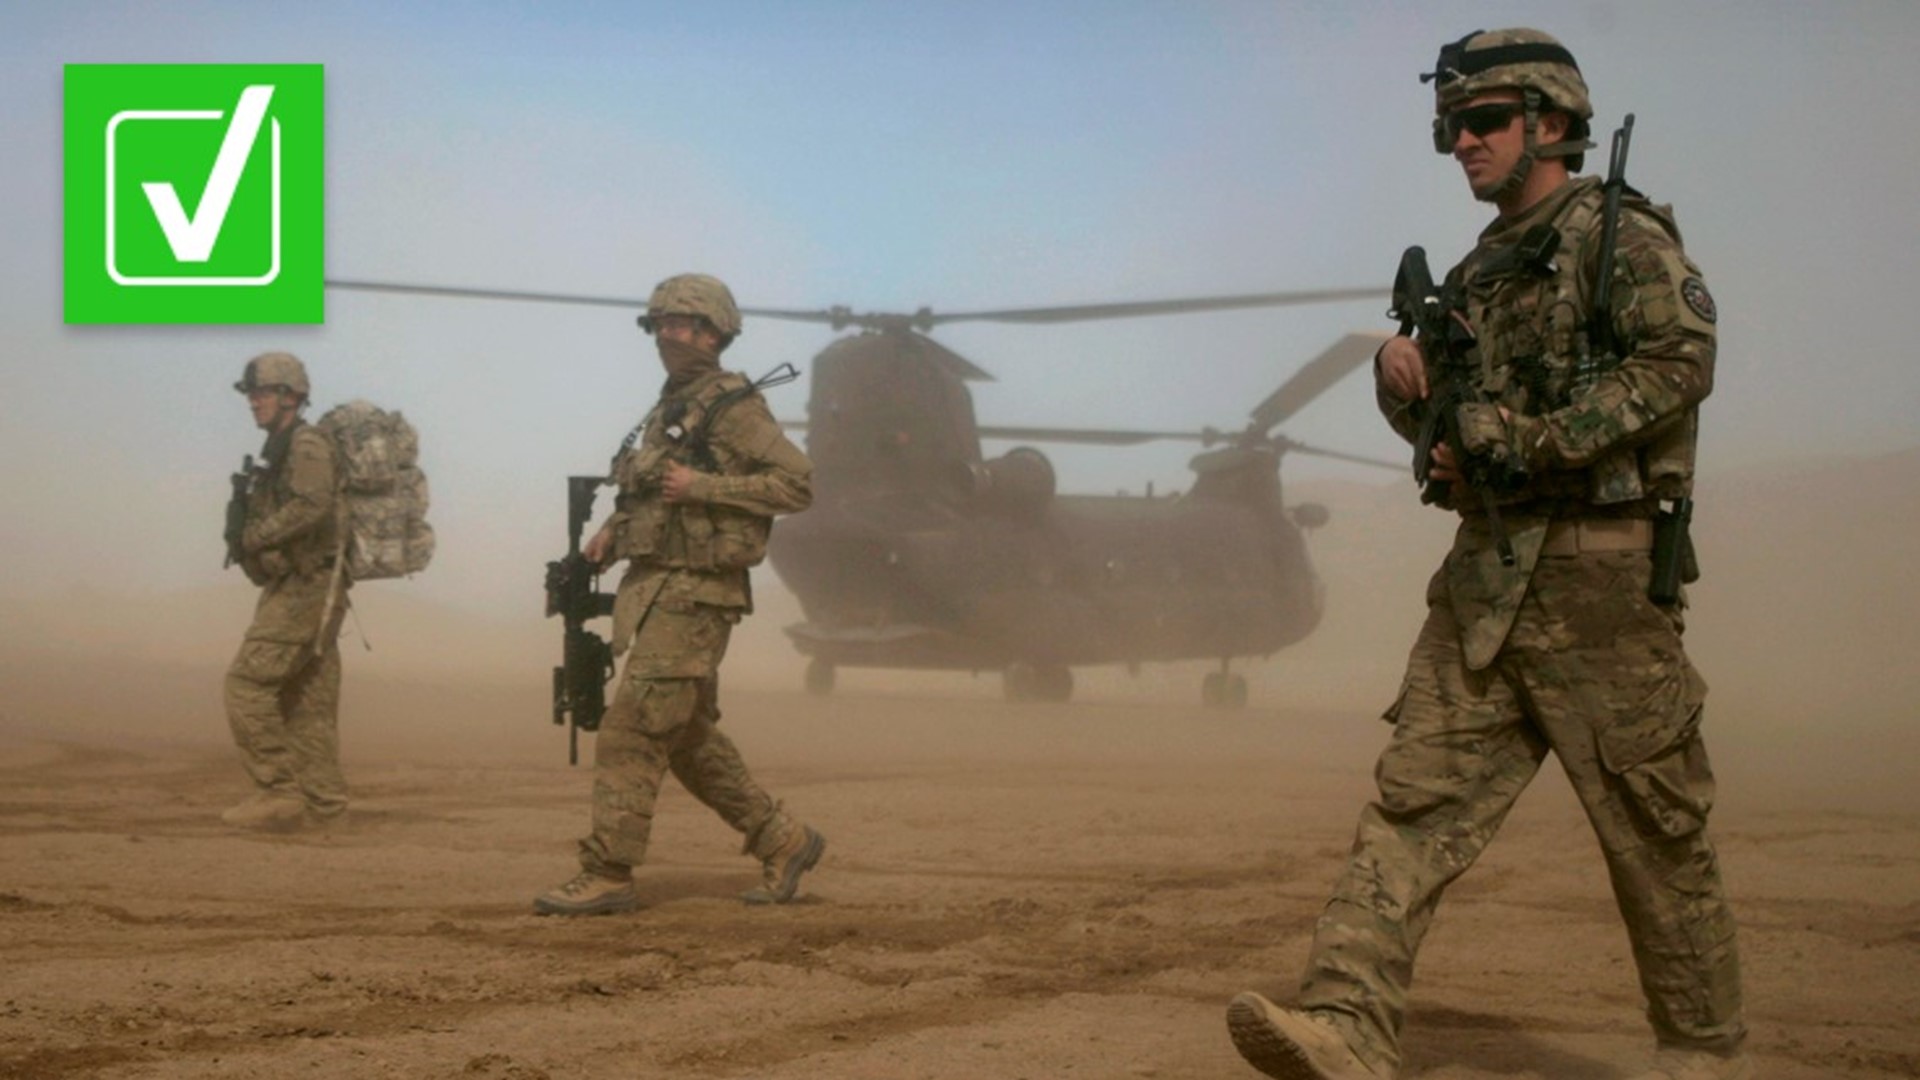 It’s true the original U.S. mission was to fight terrorism following 9/11, but reconstructing Afghanistan became a goal after the Taliban lost government power.